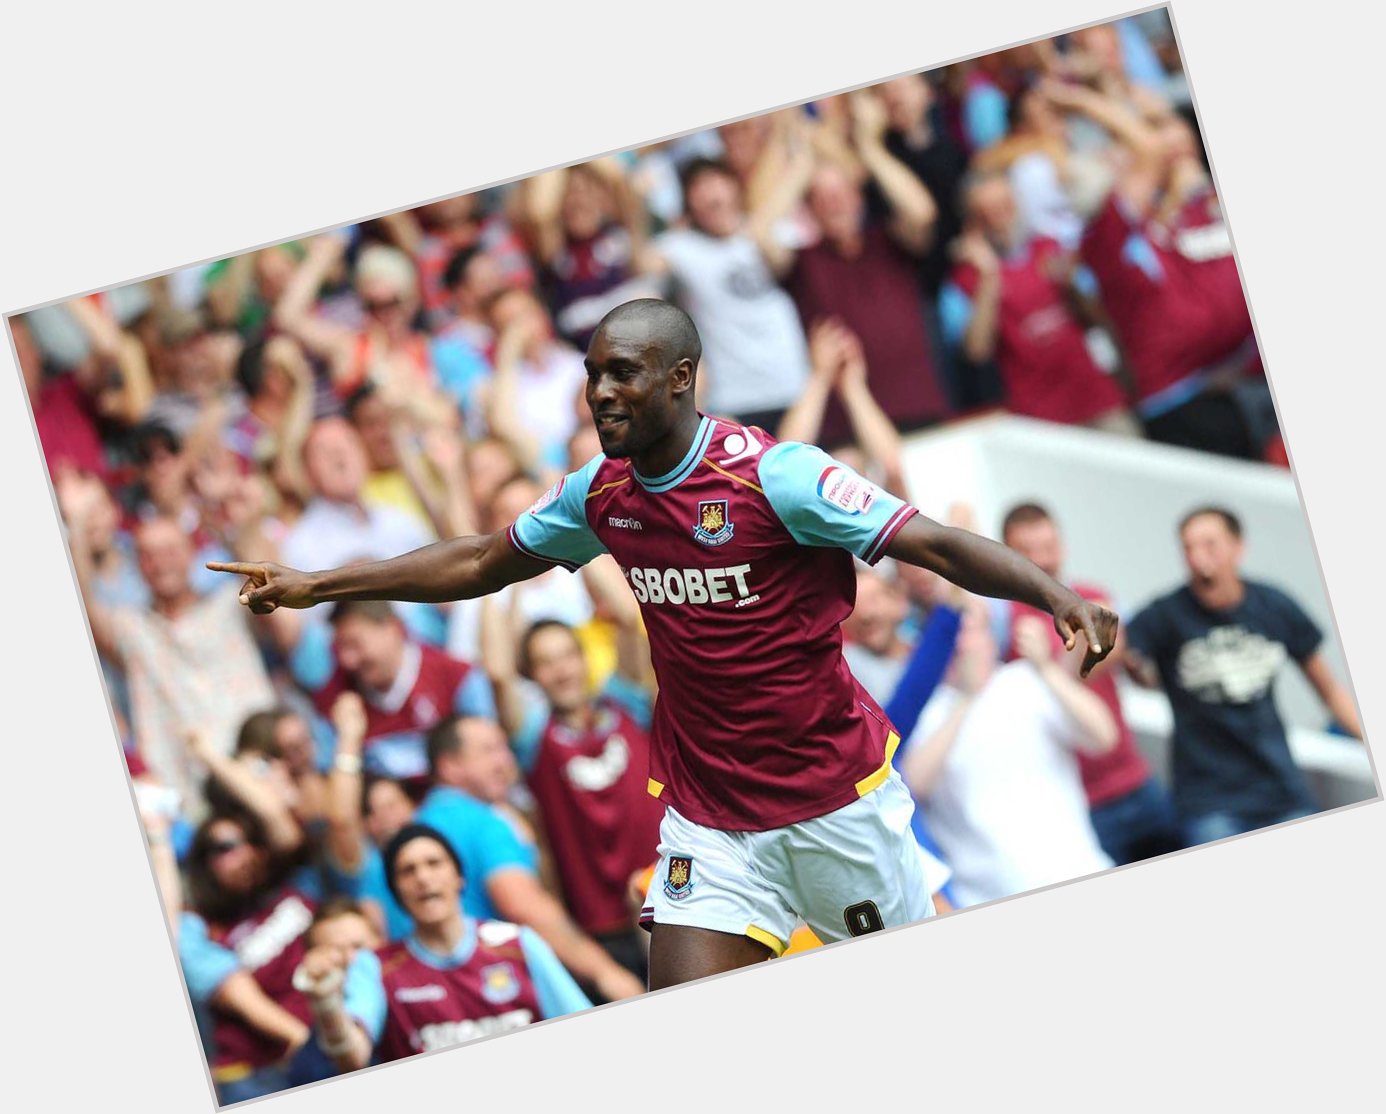 Happy Birthday to West Ham legend Carlton Cole. A man every West Ham fan loves. Have a good day 